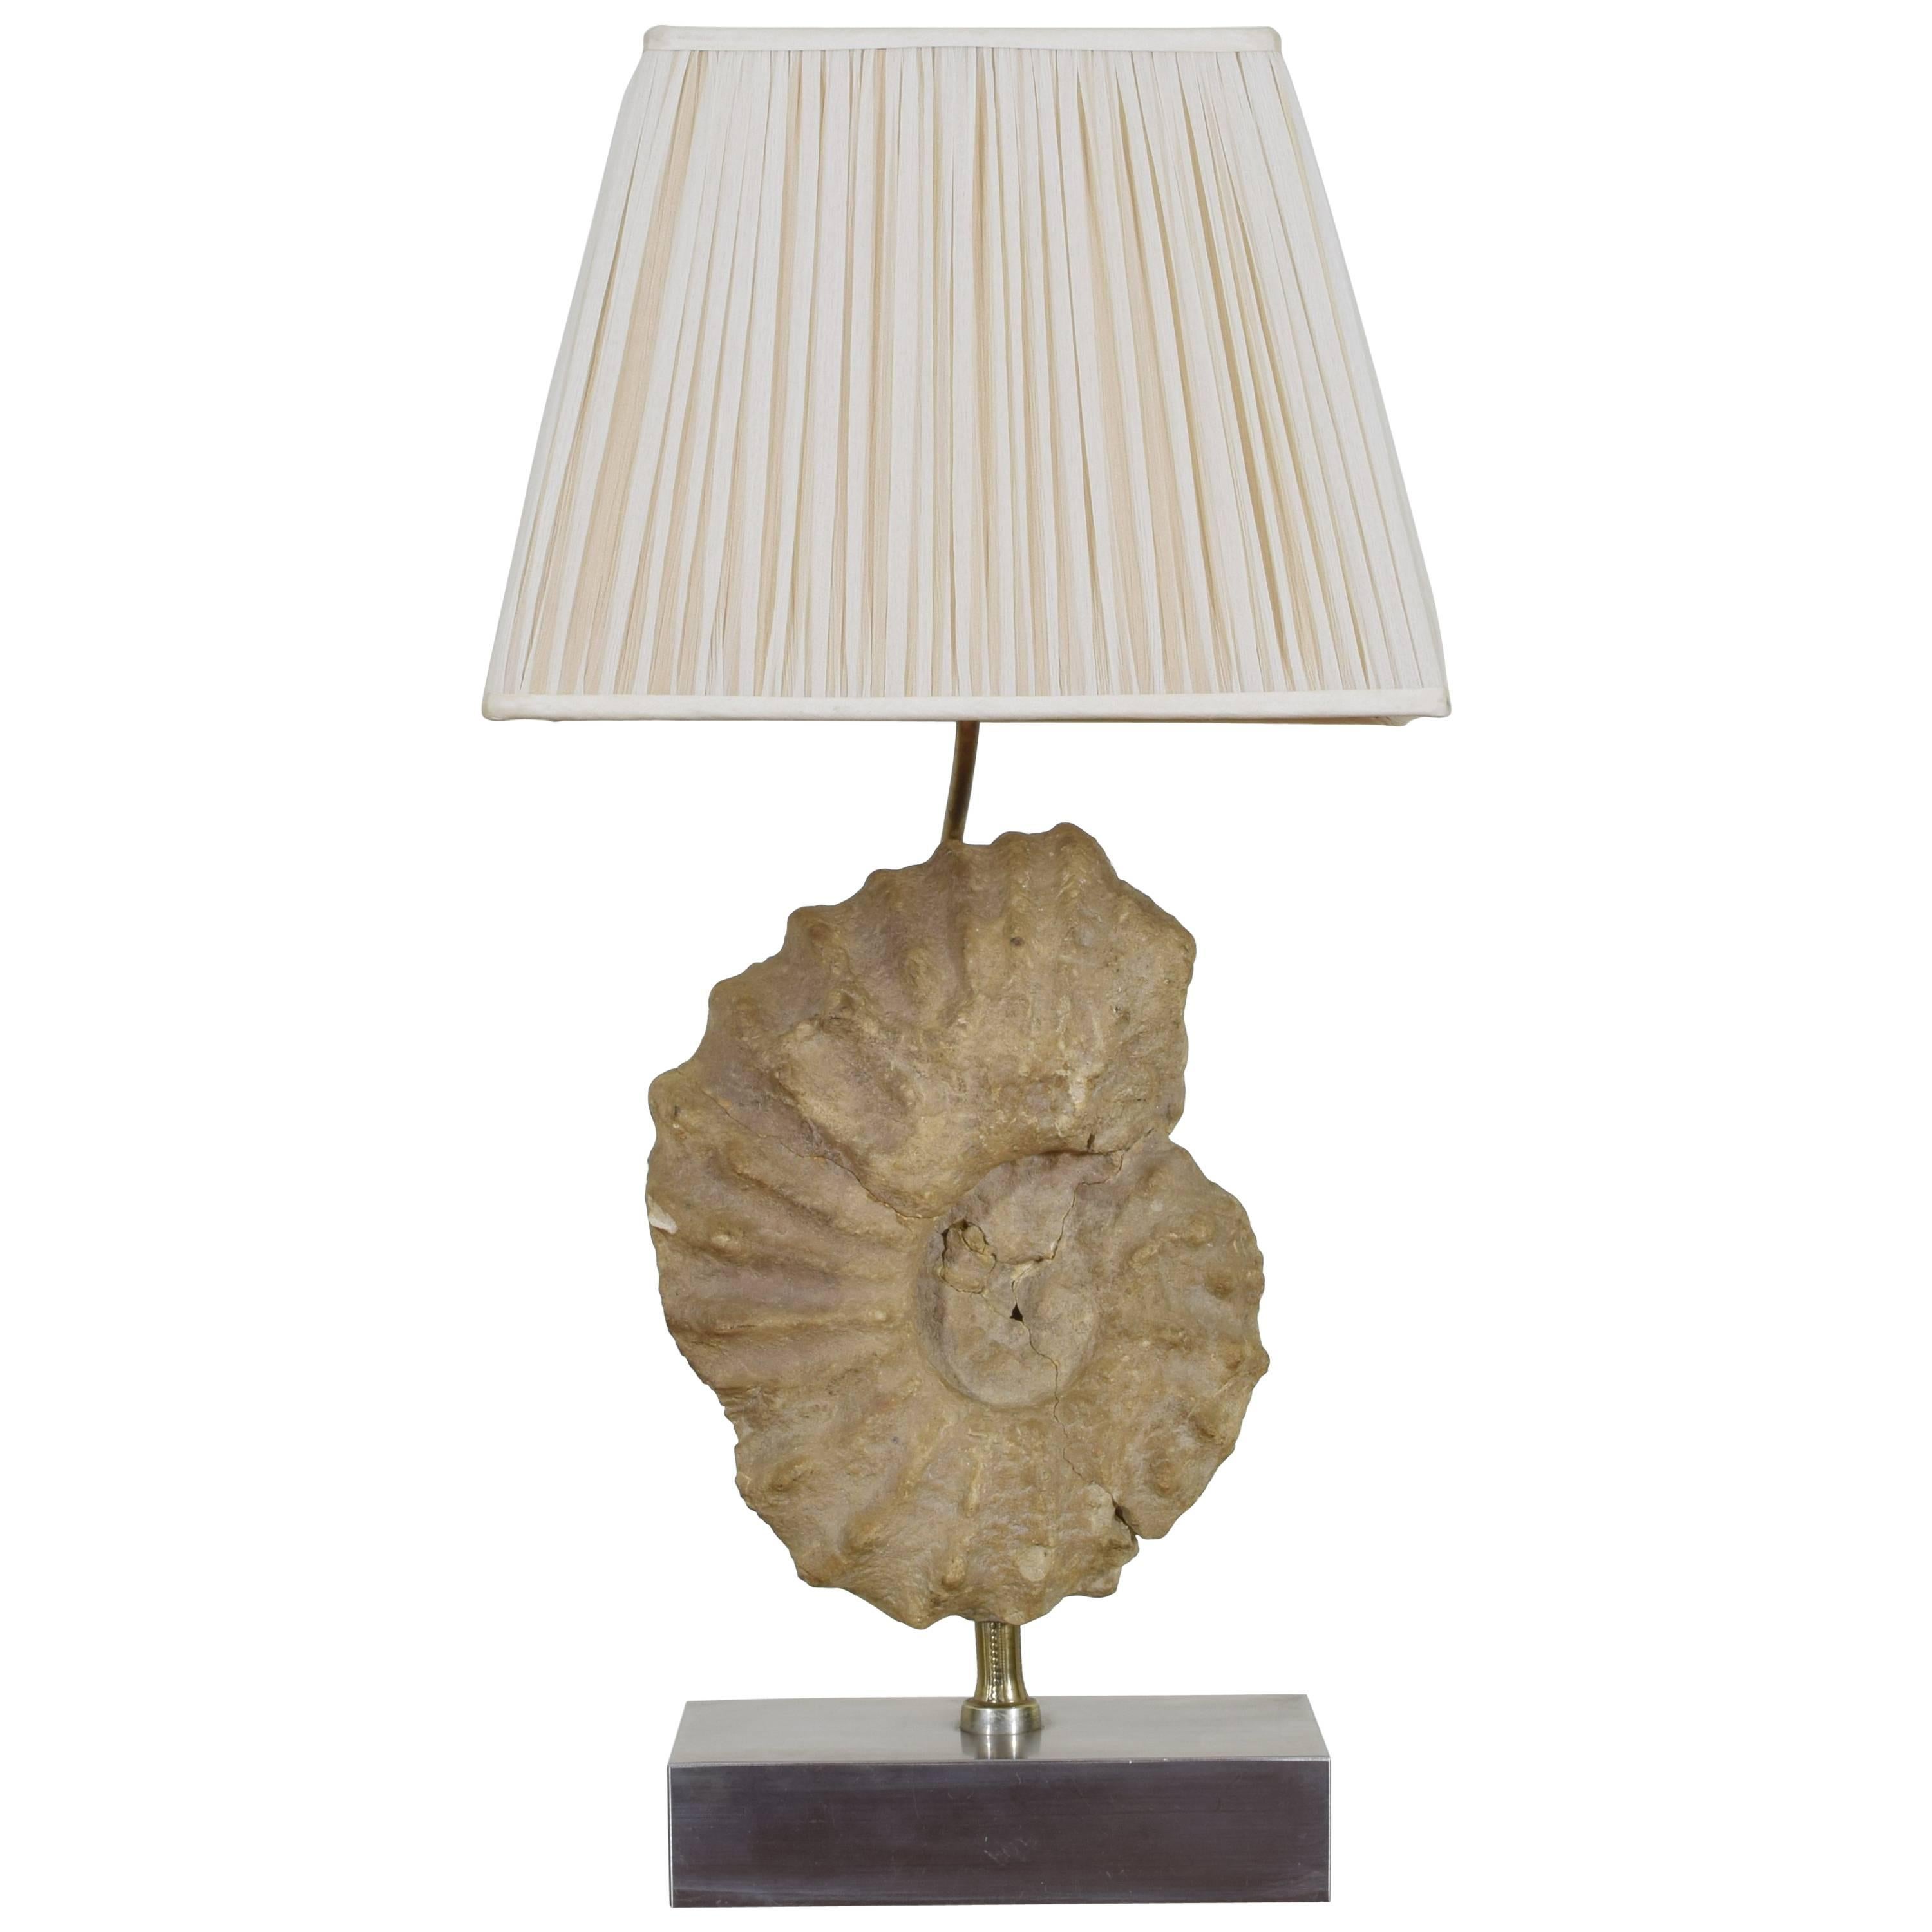 French Ammonite Fossil Mounted as a Table Lamp on a Brushed Steel Base